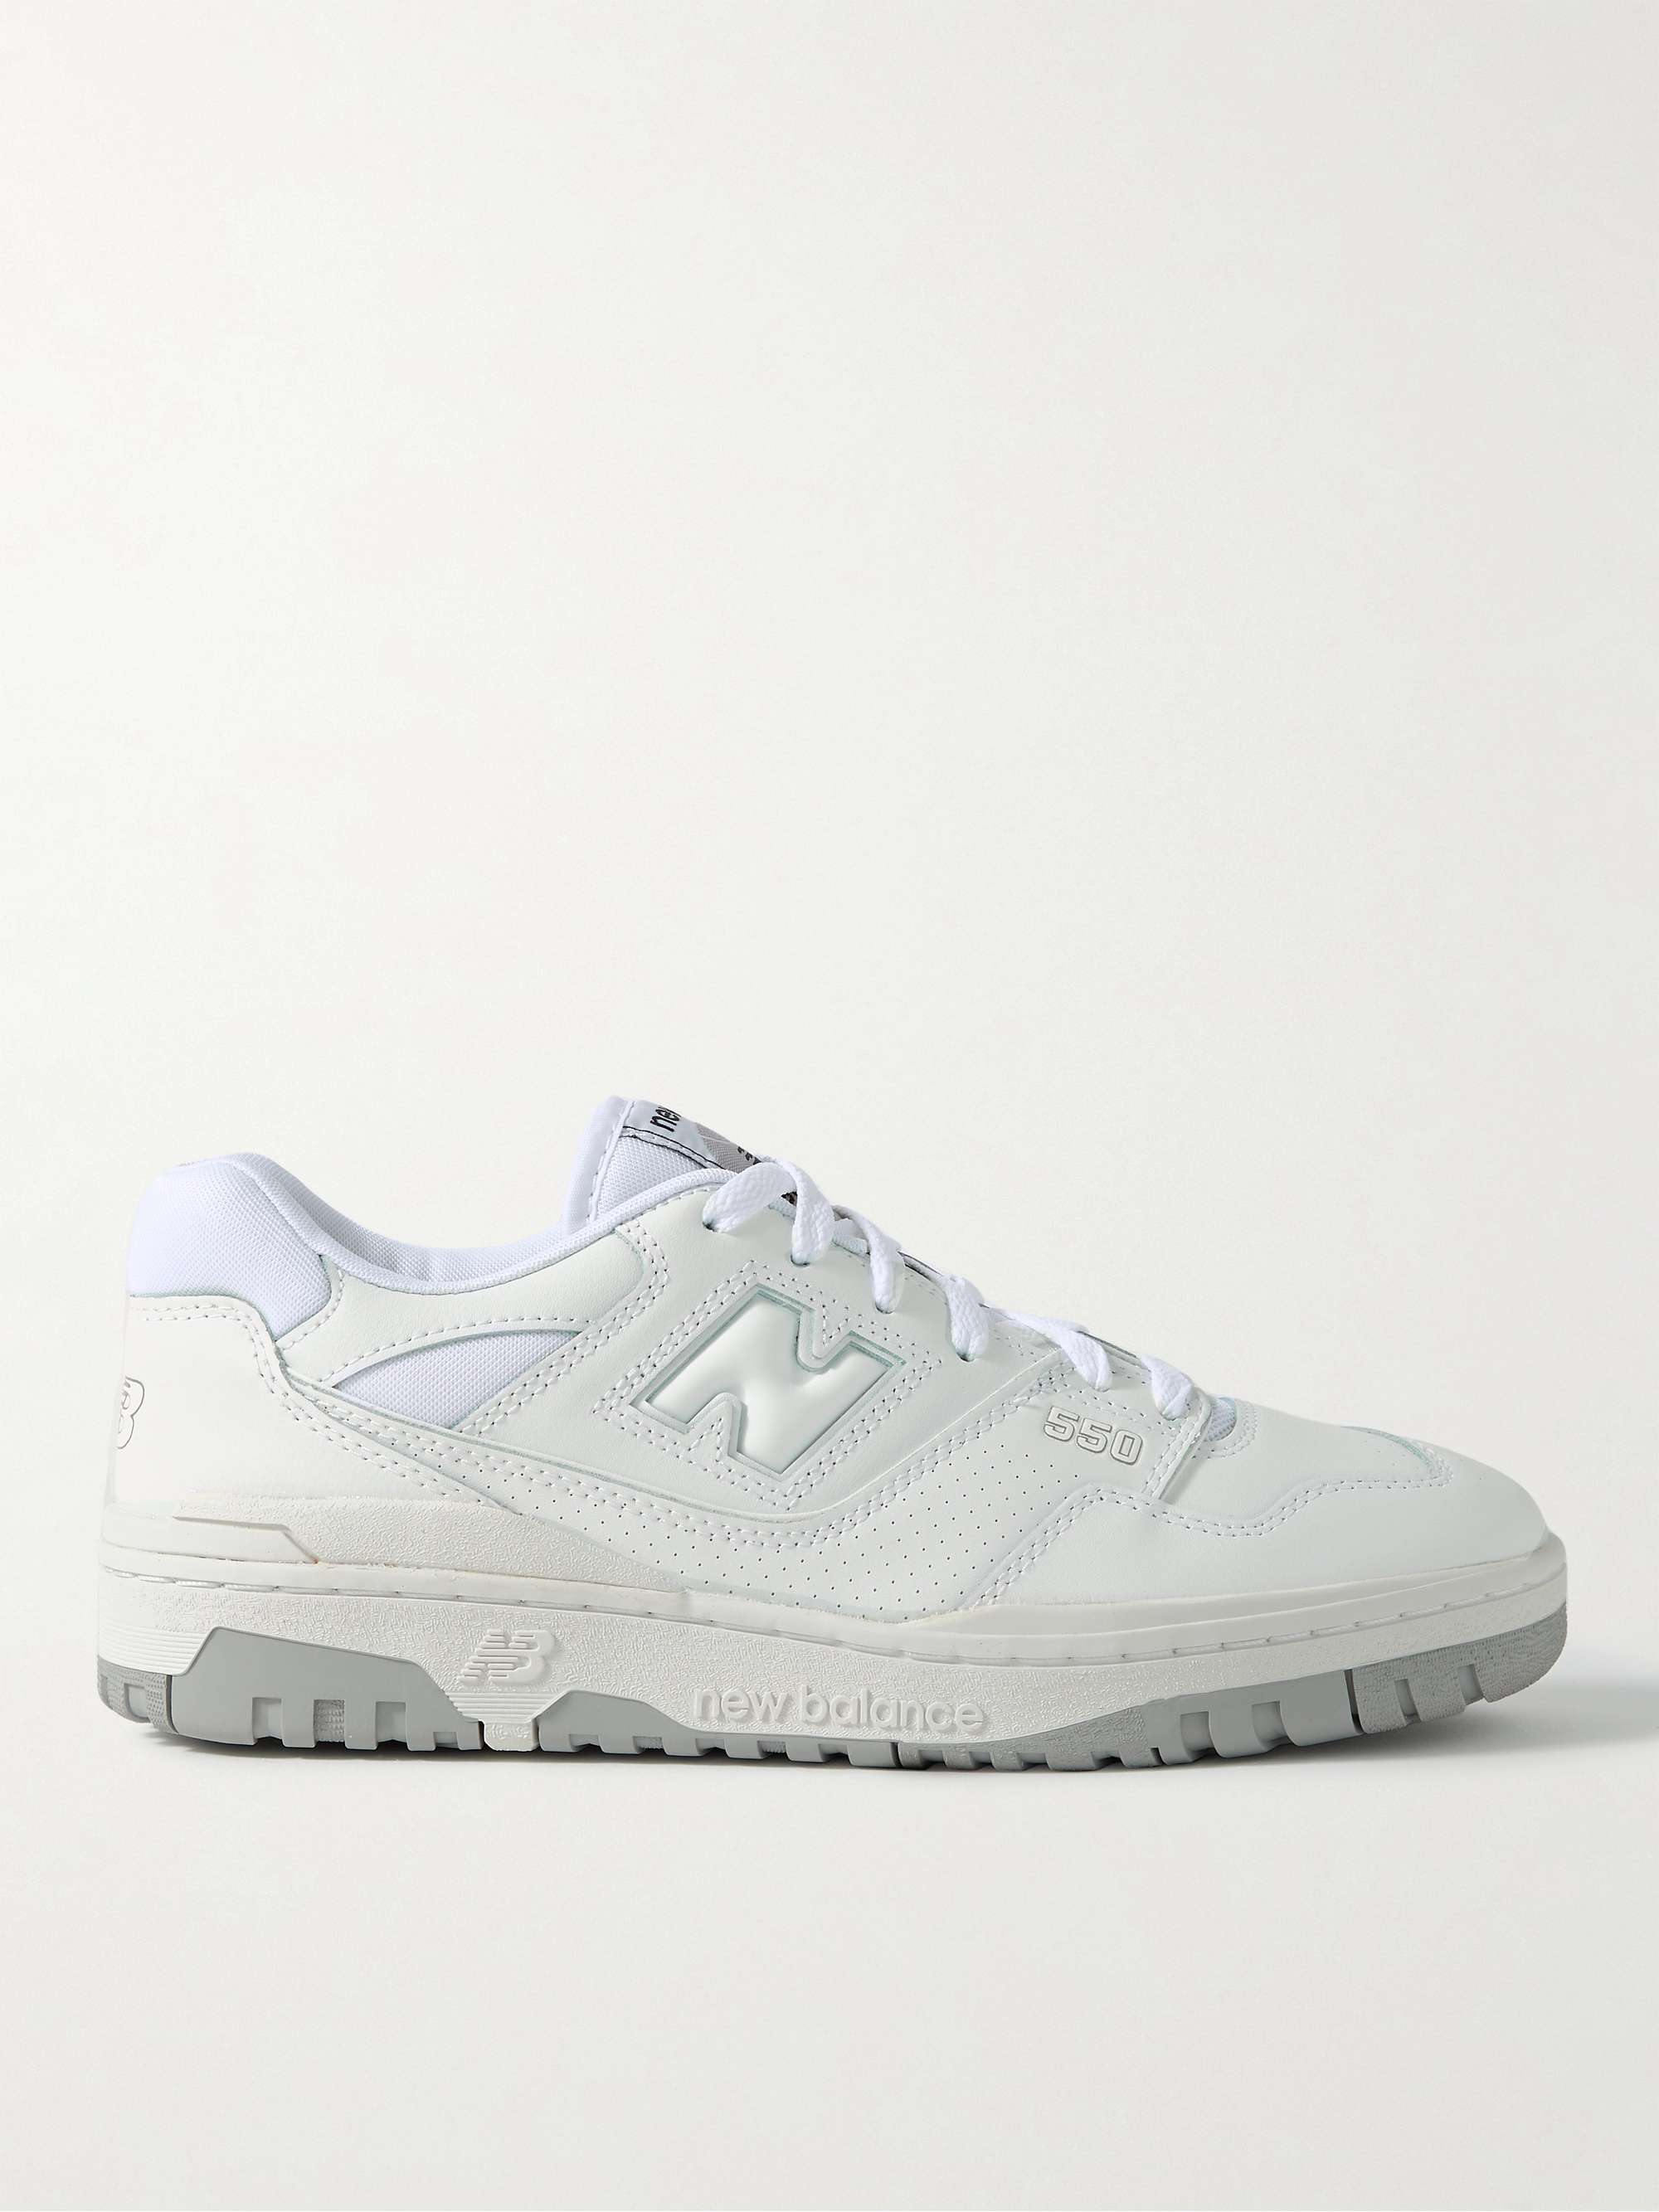 NEW BALANCE 550 Perforated Leather Sneakers | MR PORTER